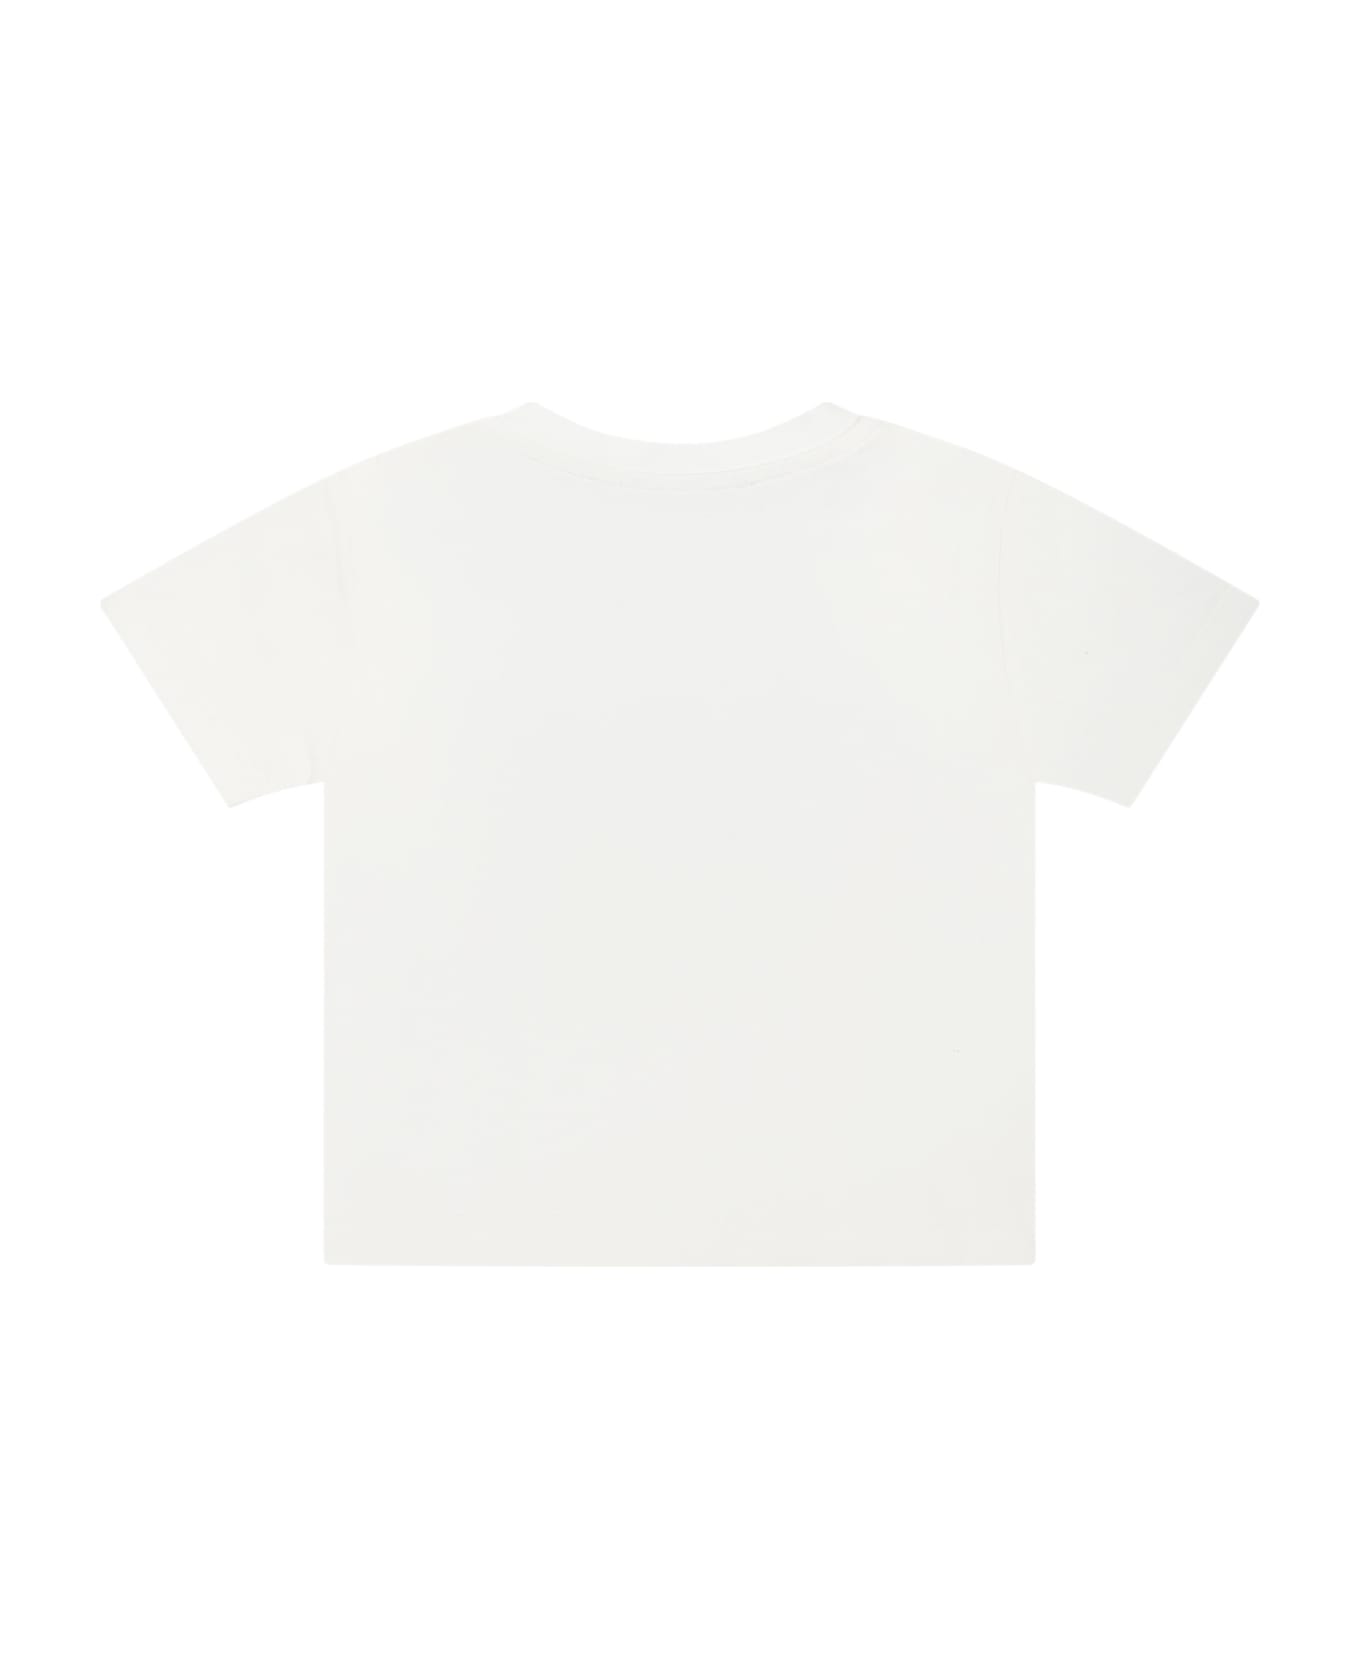 Versace White T-shirt For Baby Boy With Medusa Logo - Bianco Tシャツ＆ポロシャツ